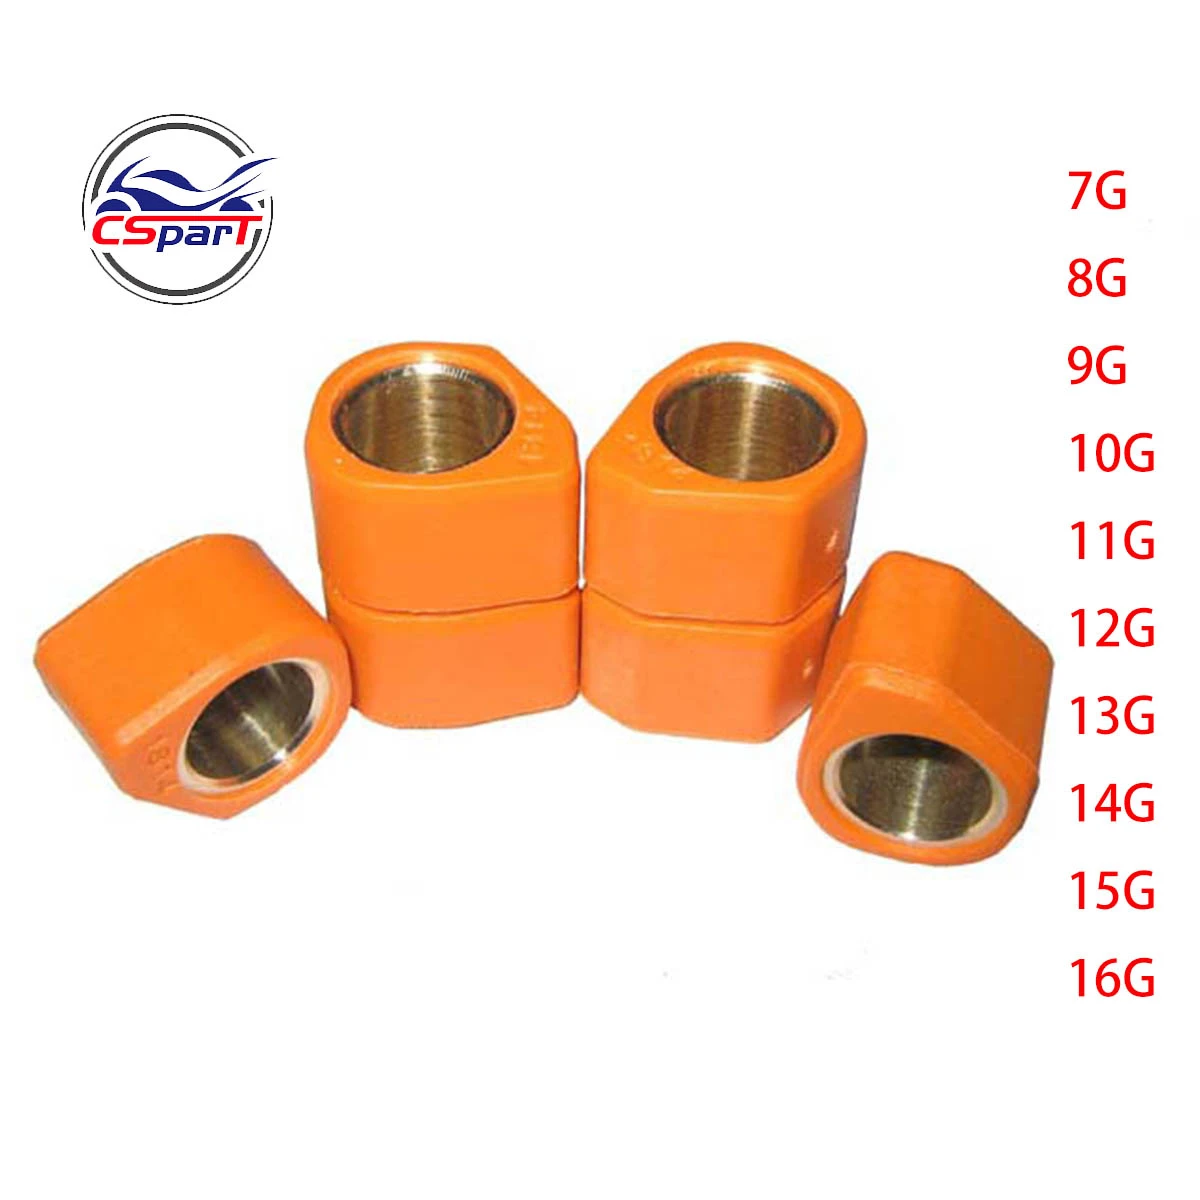 6Pcs Variator Roller 12g Weights 18X14 Performance For GY6 Scooter 125 150cc ATV